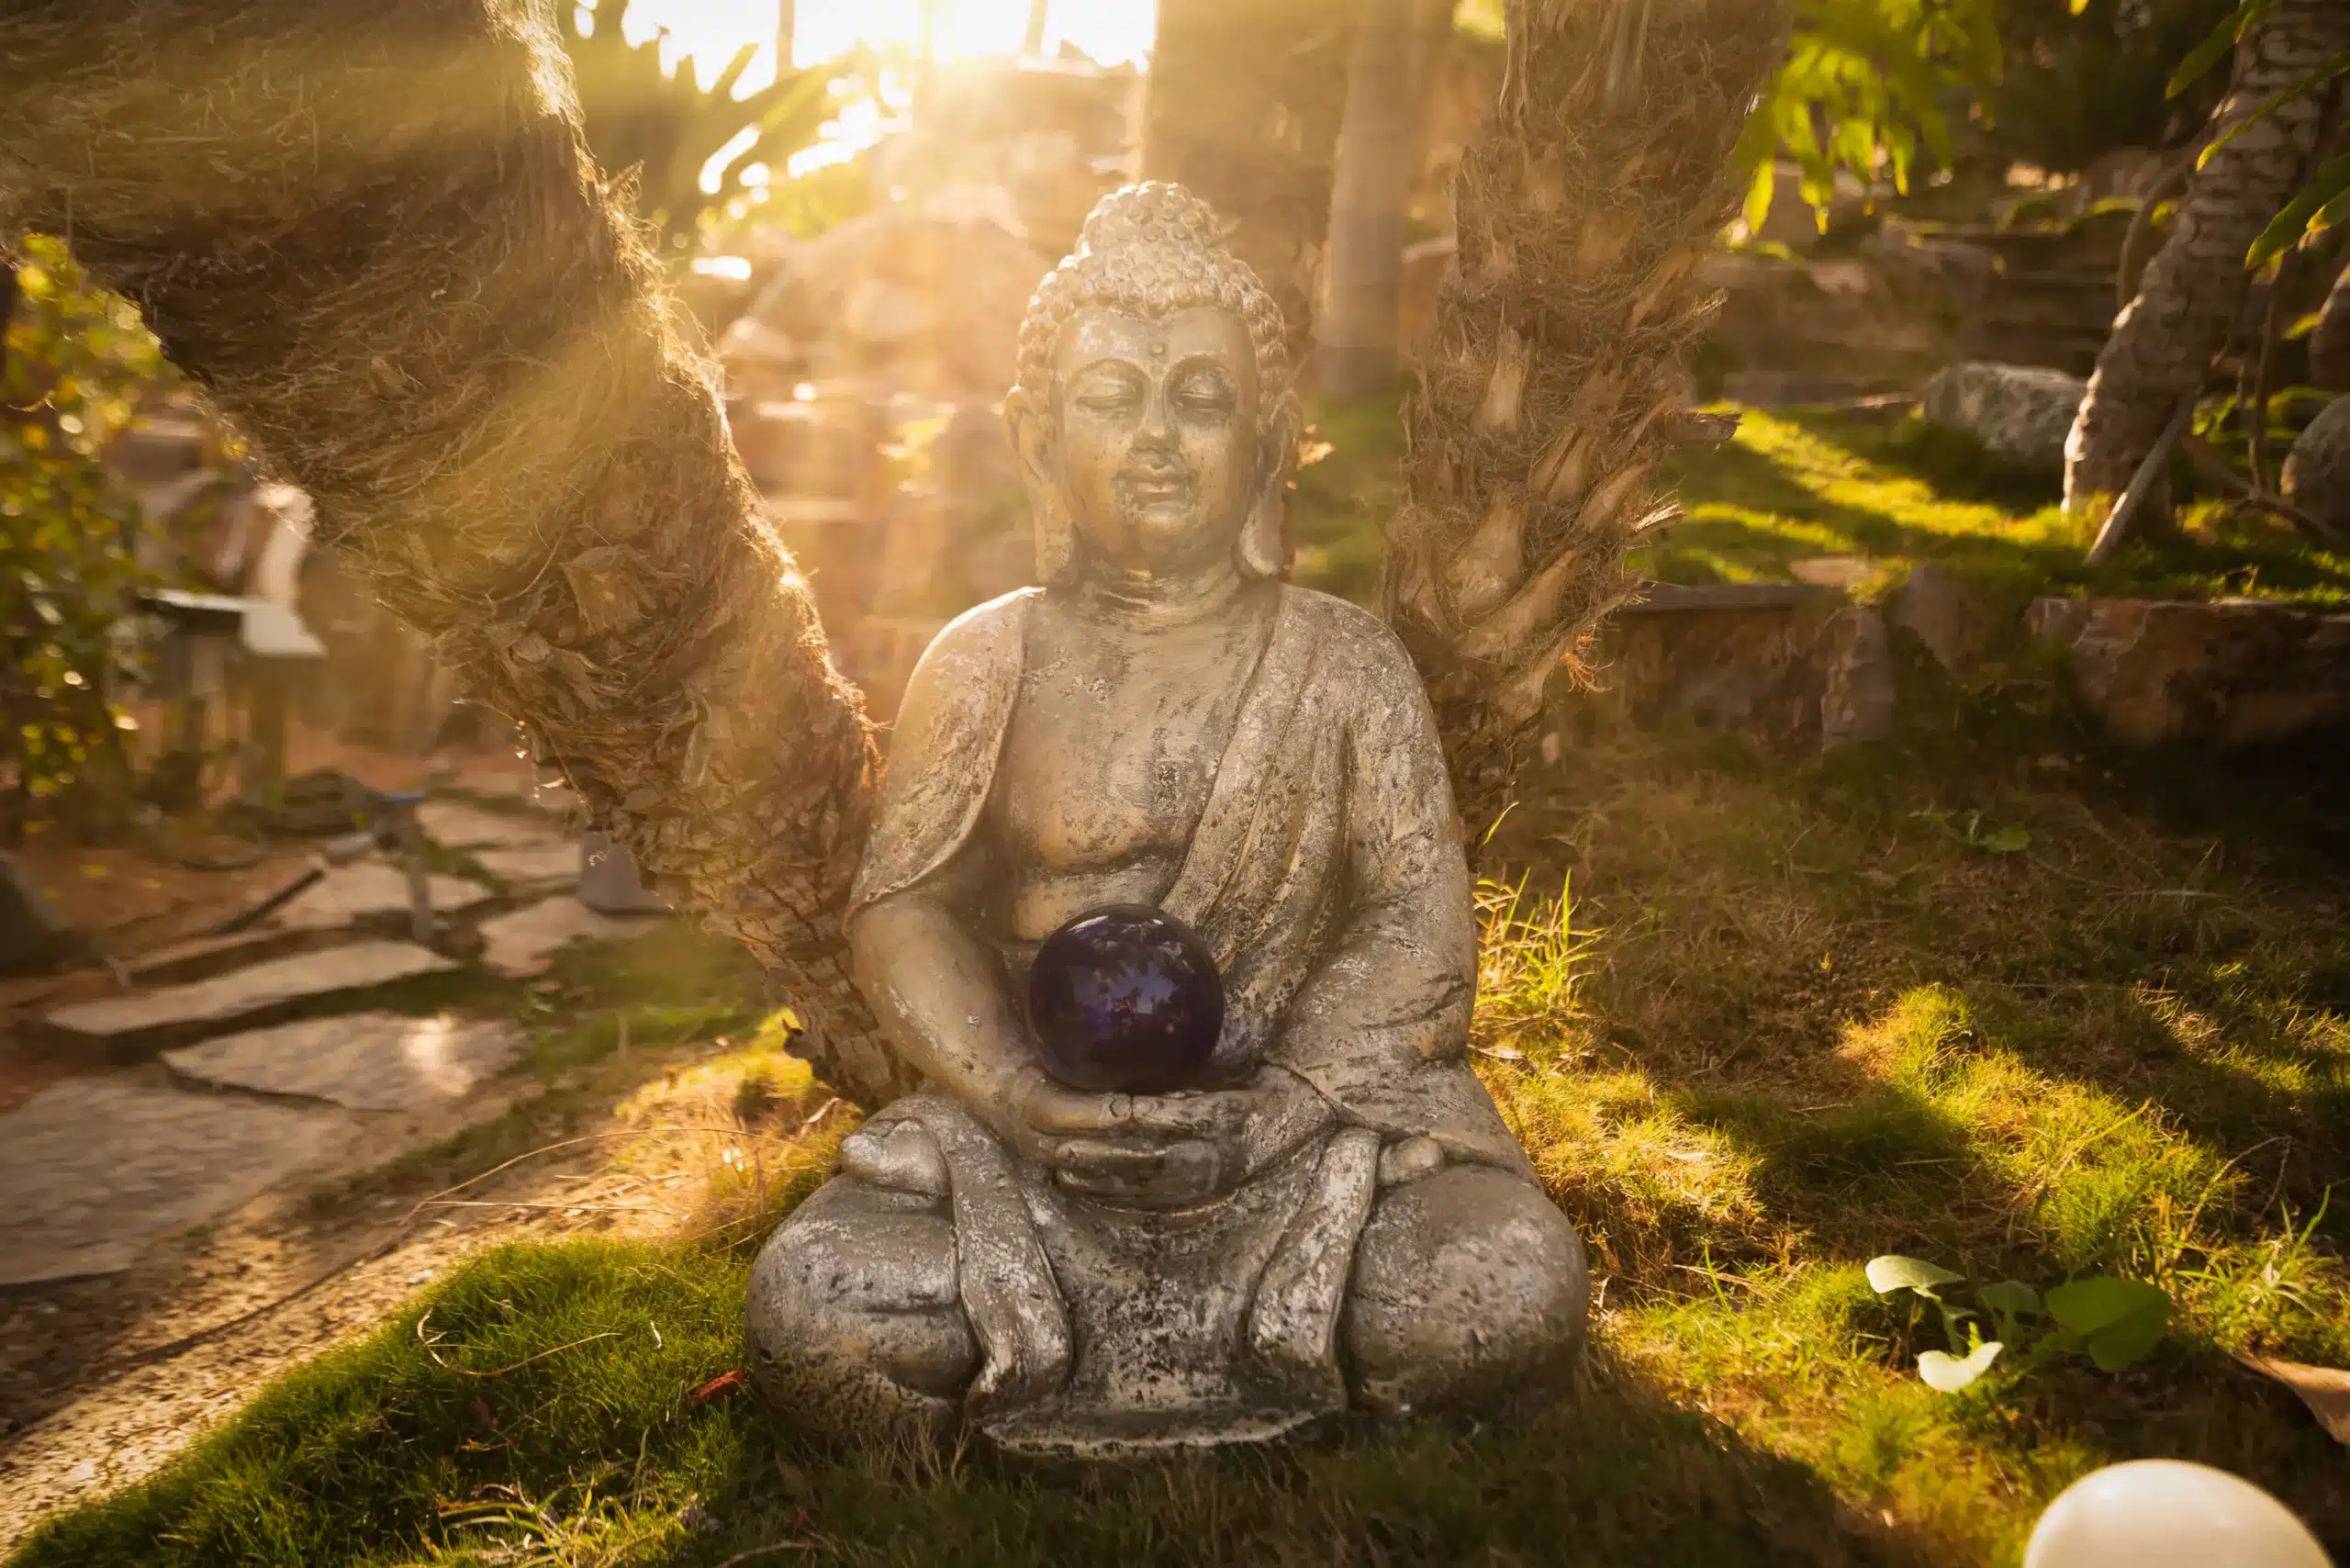 A shot of our statue of Buddha. Sunlight is peeking through the trees behind the statue, giving it a warm glow